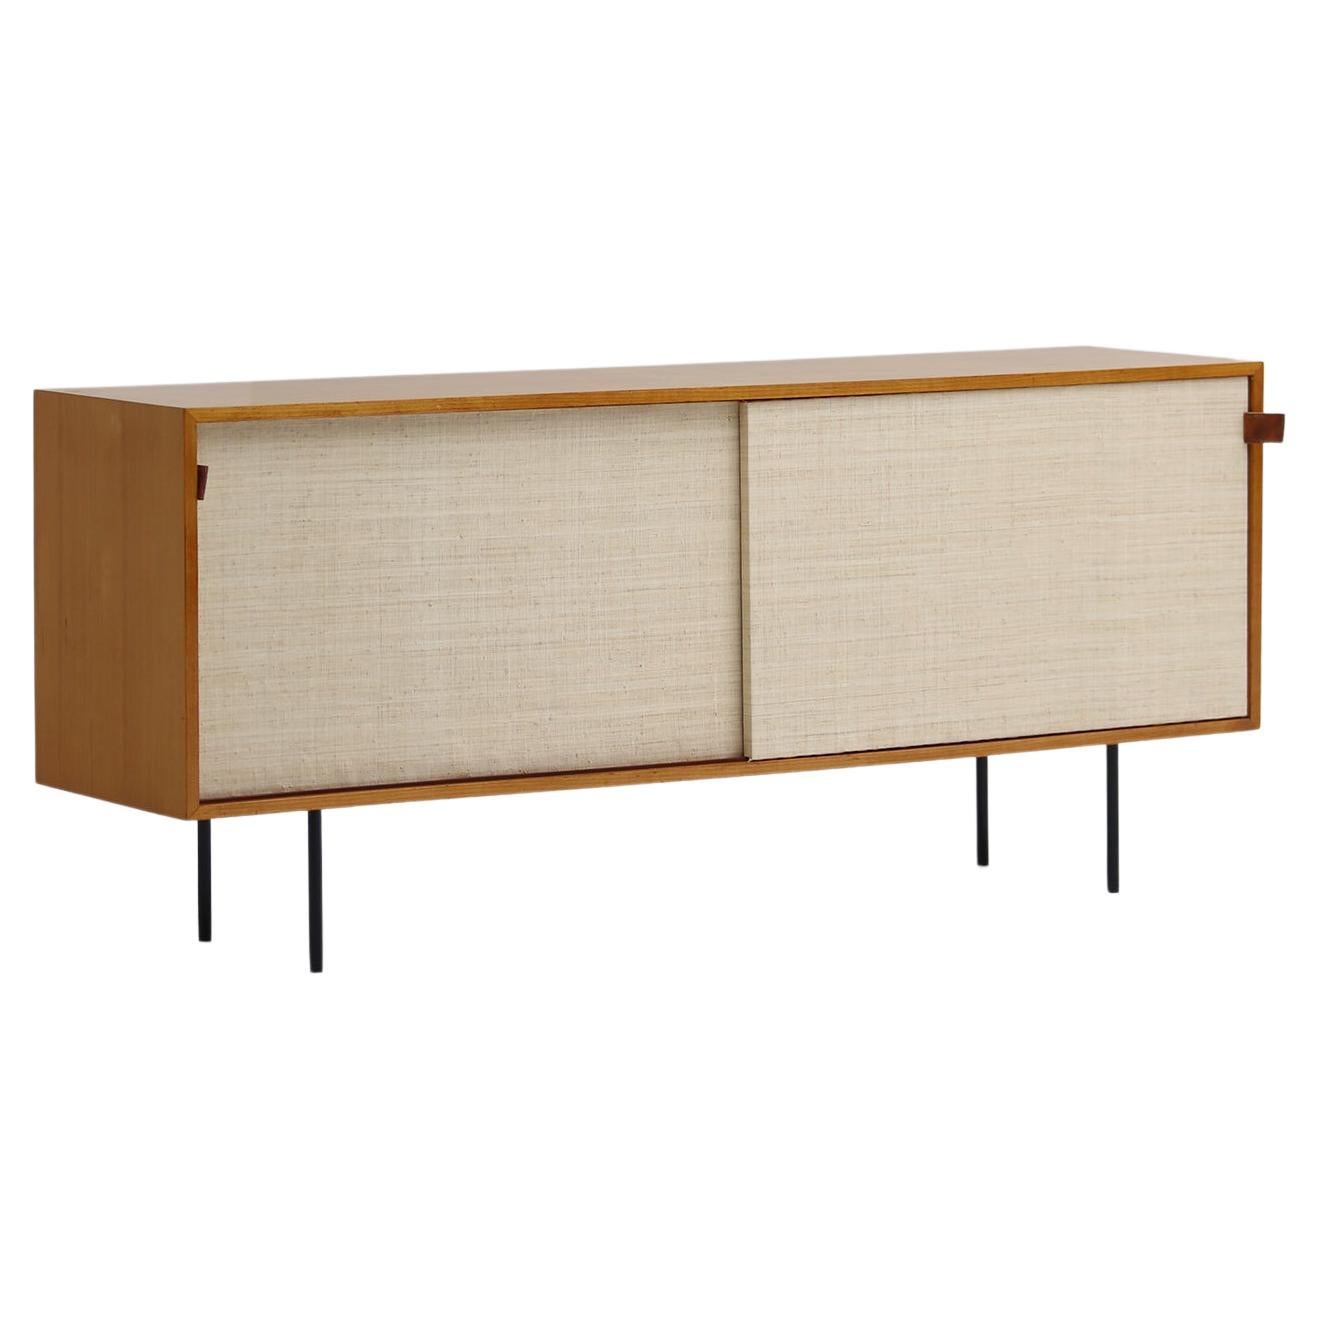 Model 116 Sideboard with Raffia Doors Designed by Florence Knoll in the 1950s